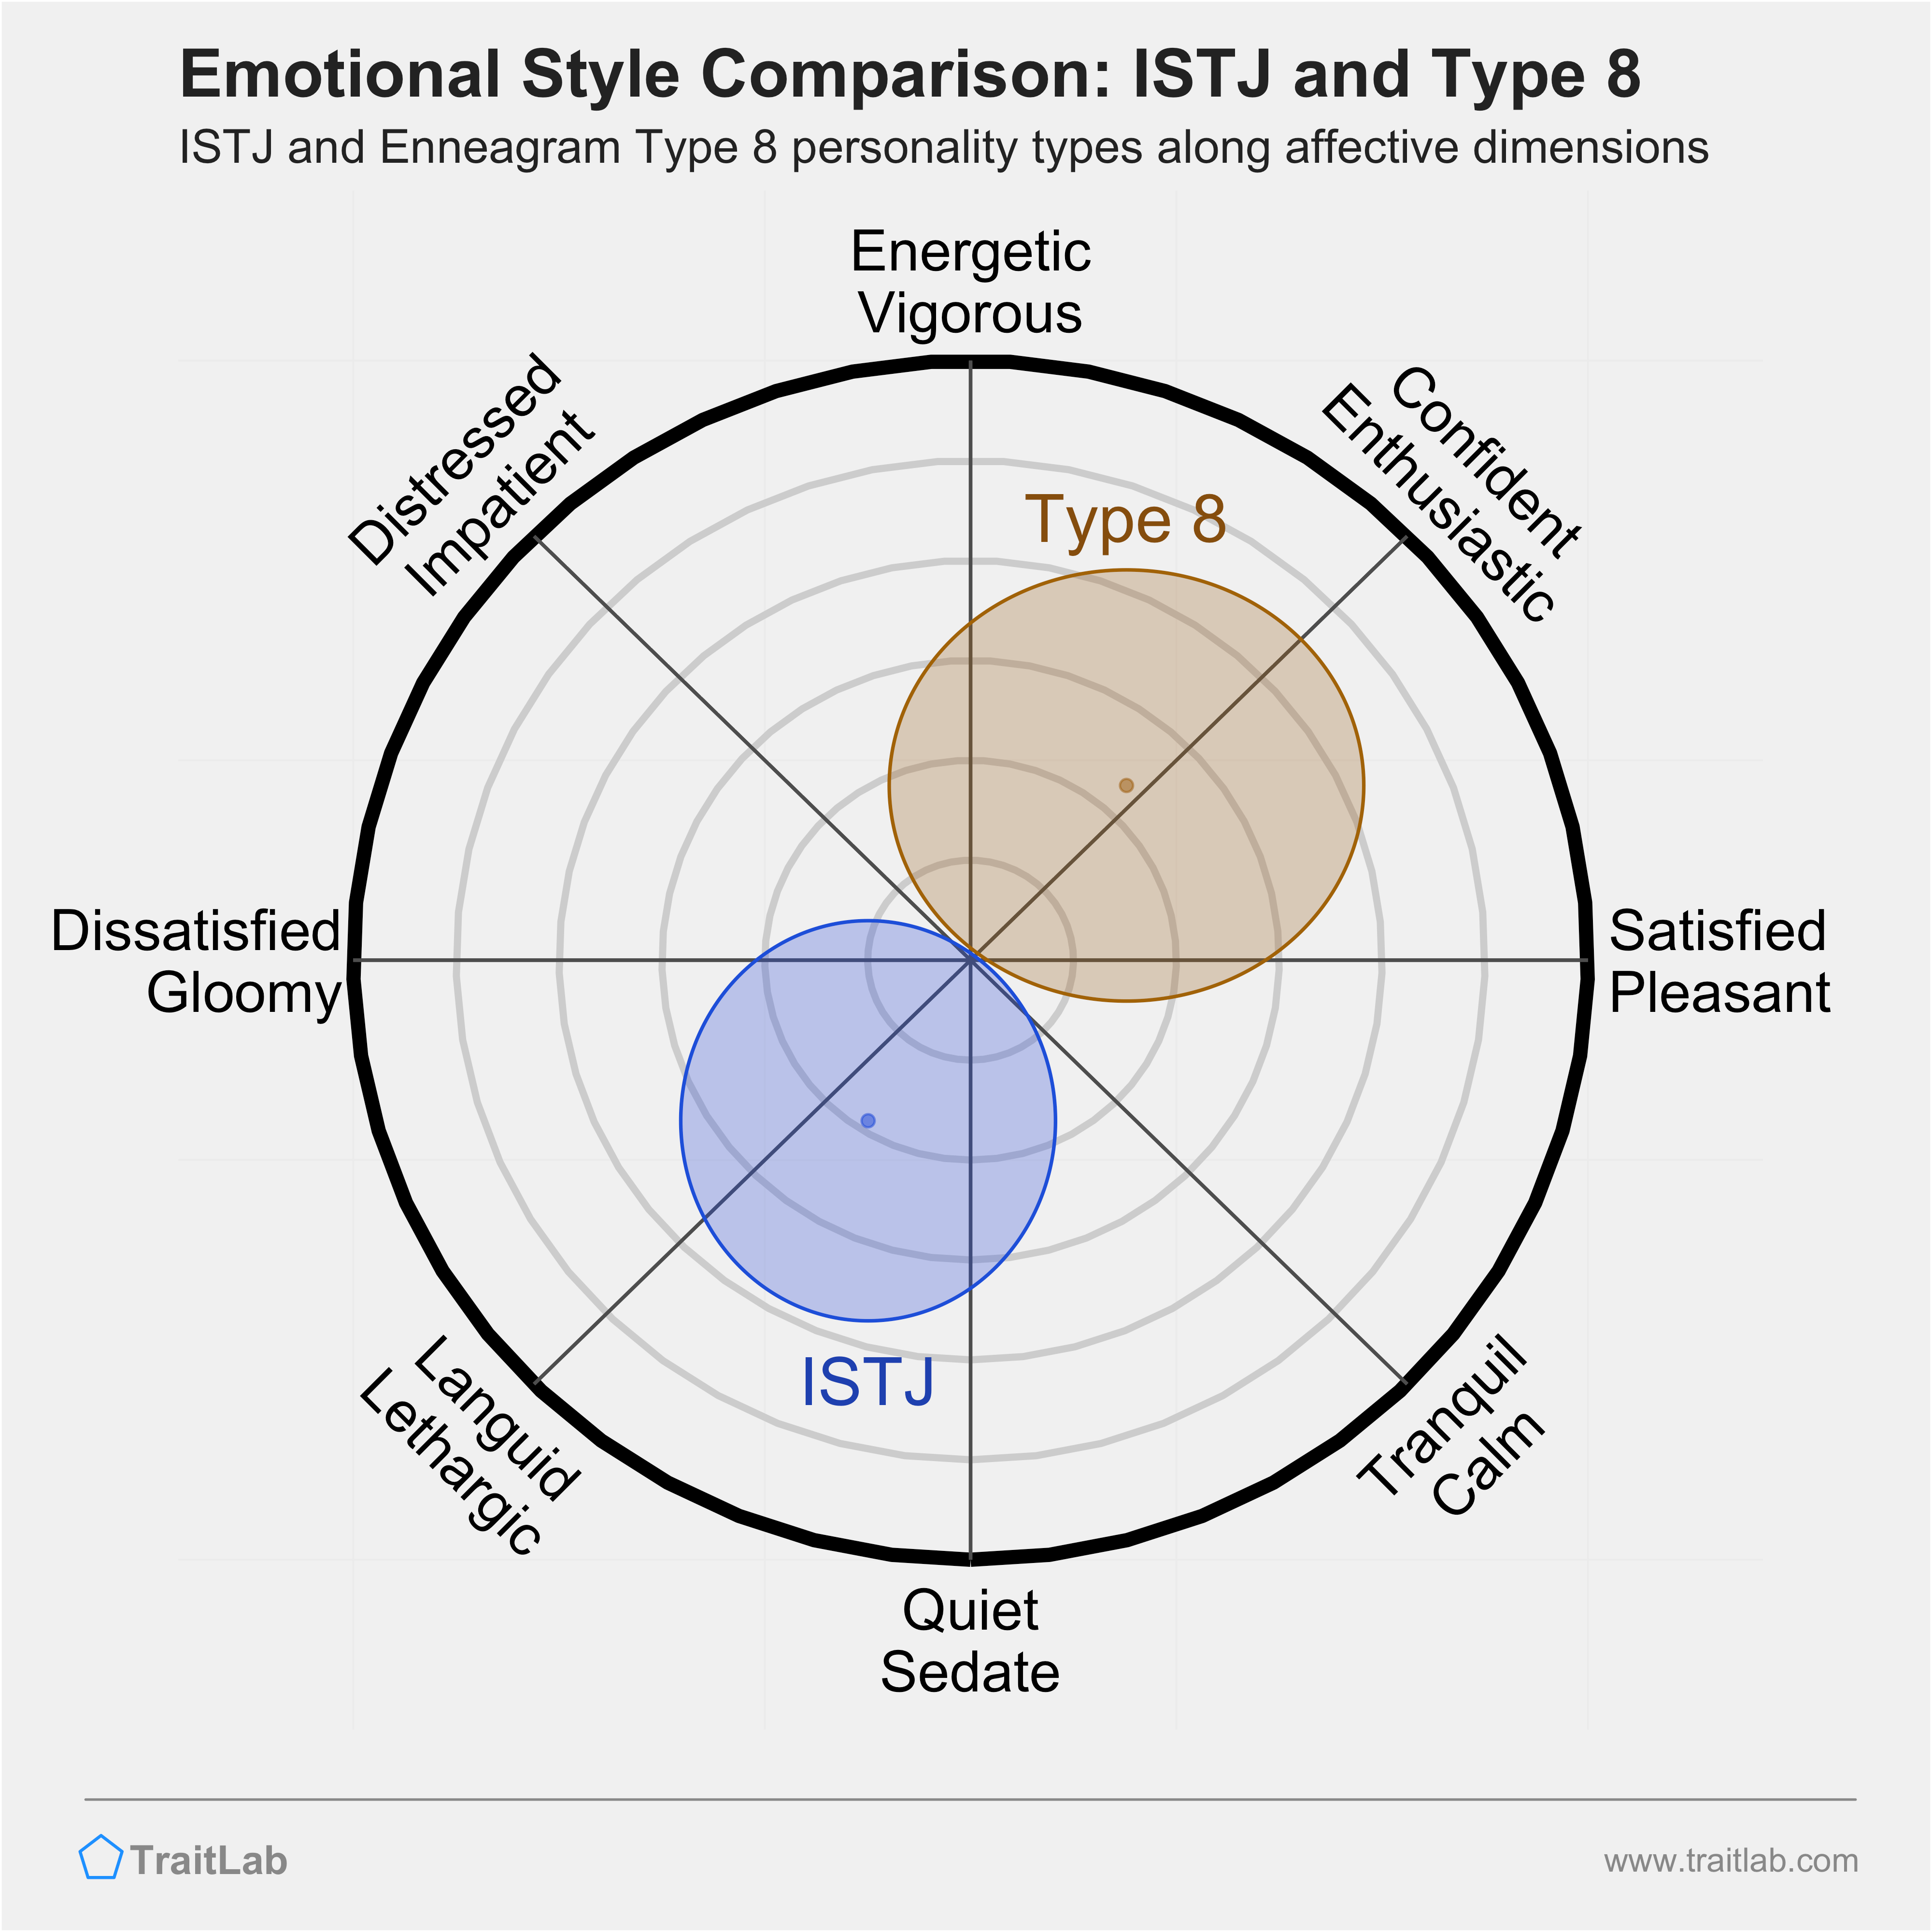 ISTJ and Type 8 comparison across emotional (affective) dimensions